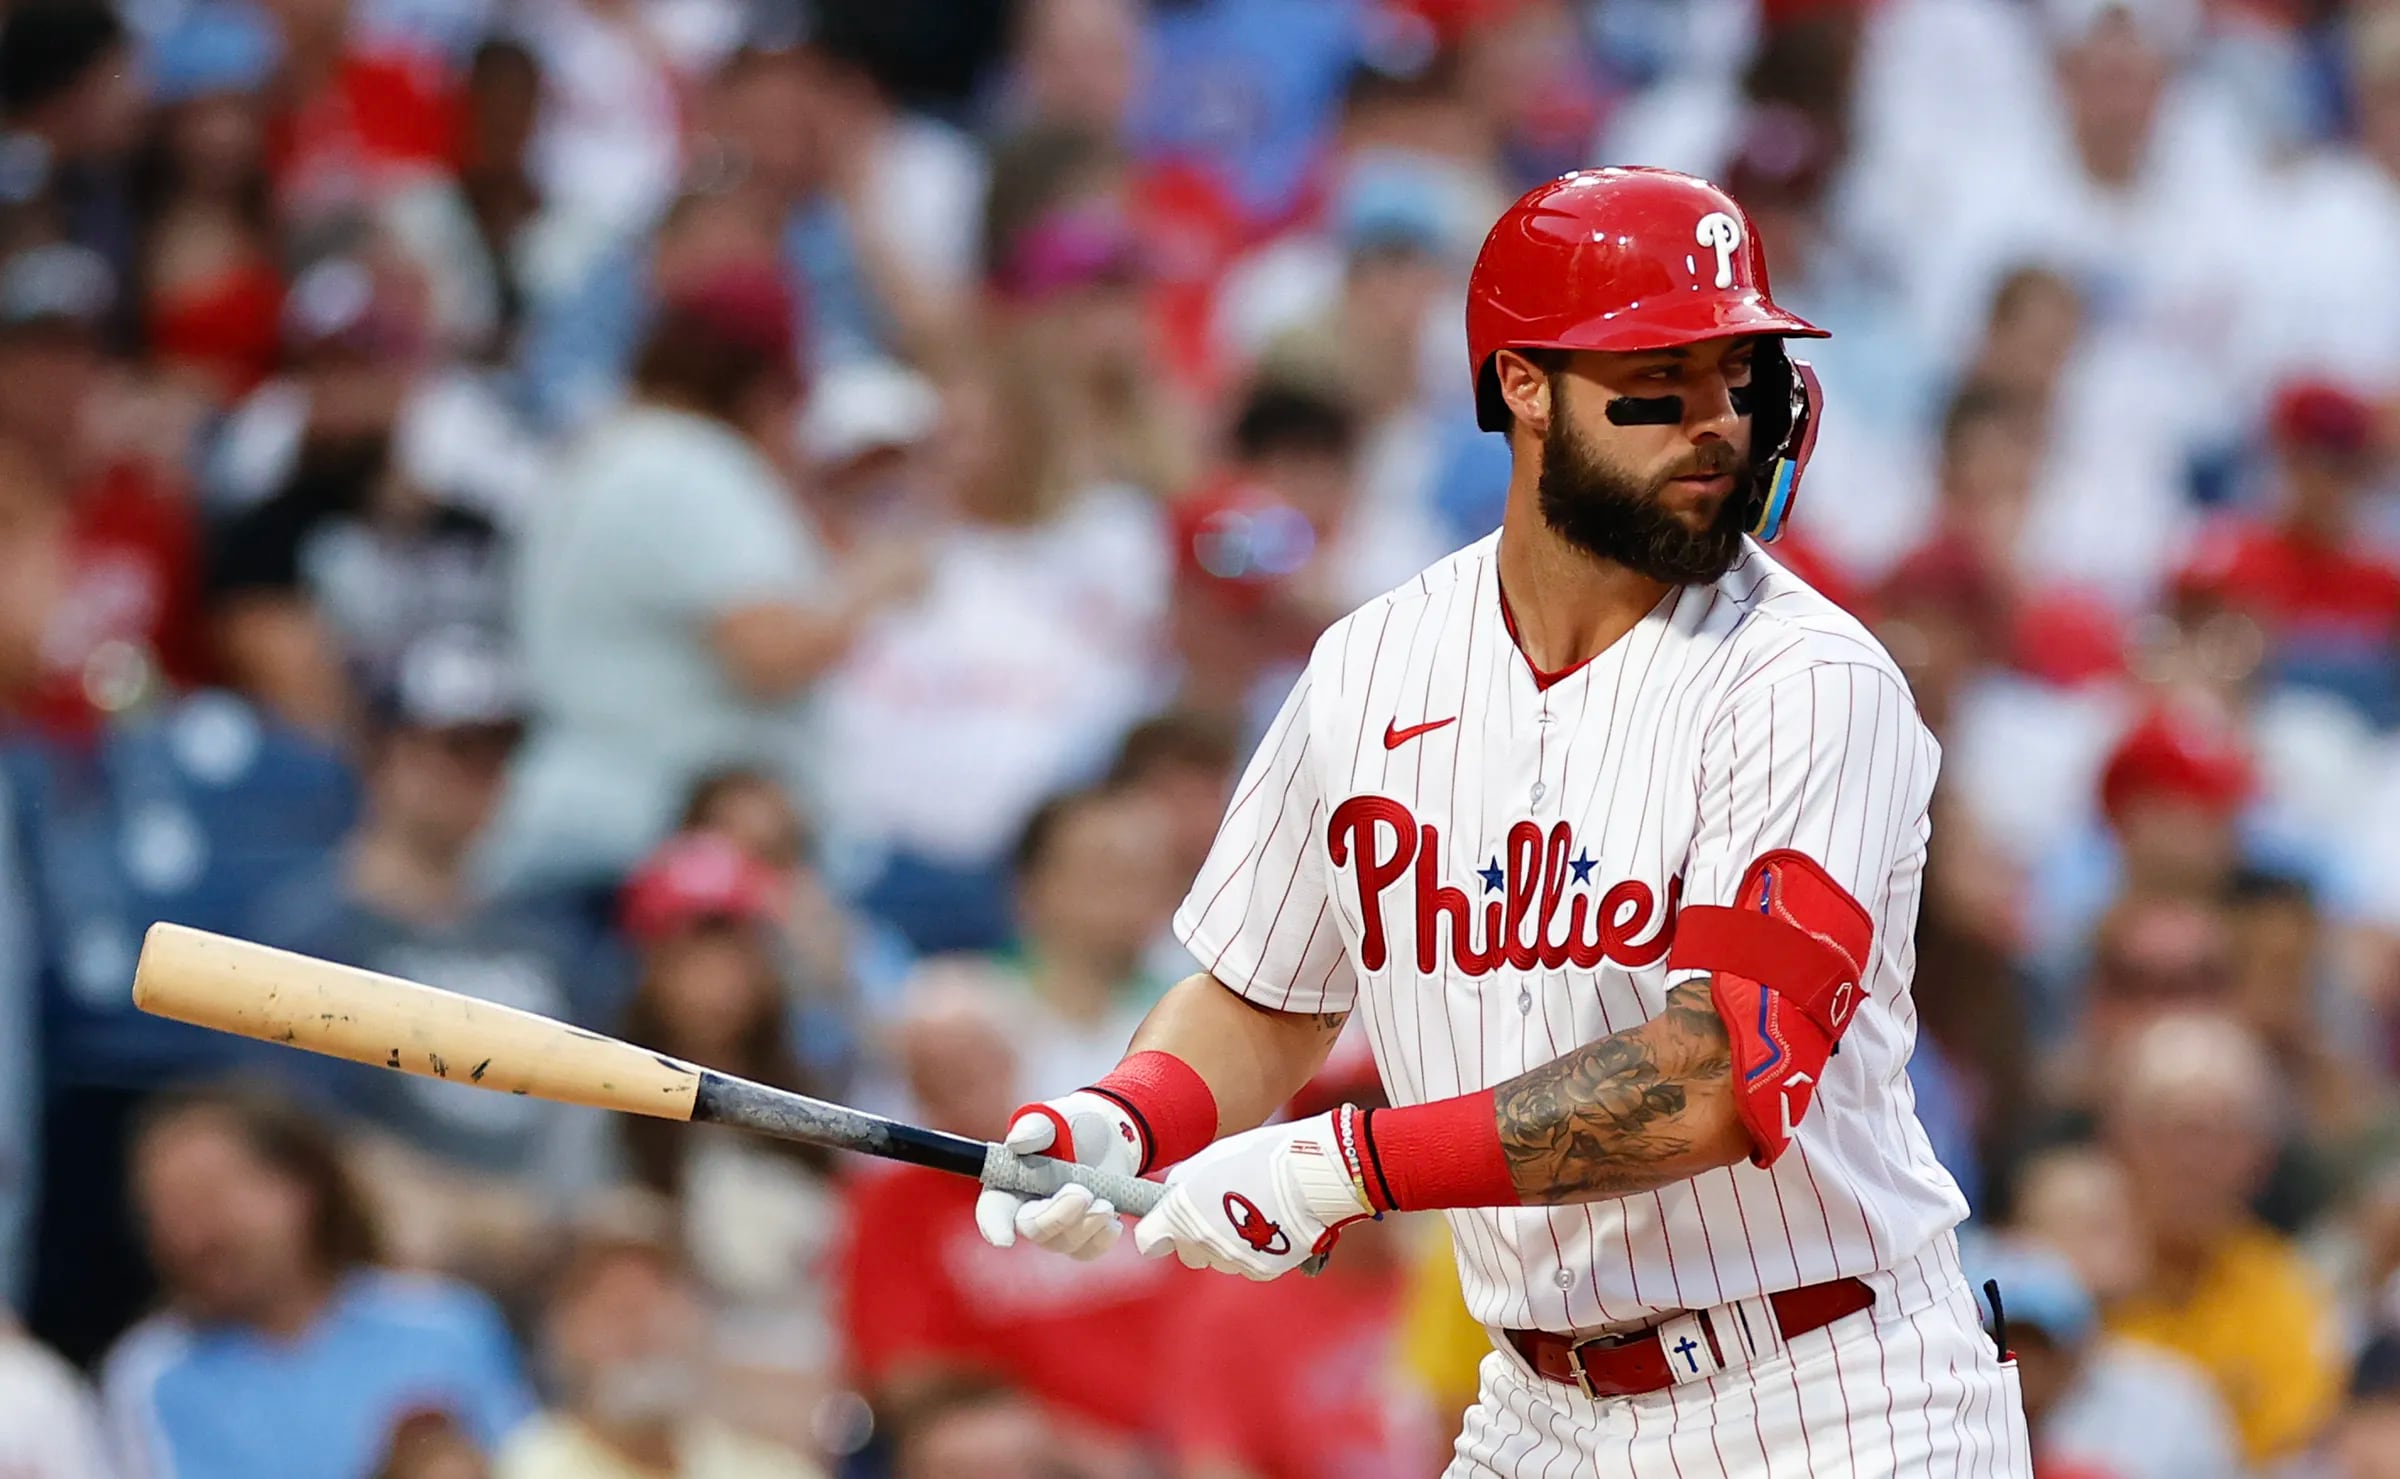 Weston Wilson homers in first Phillies at-bat, years in the minors